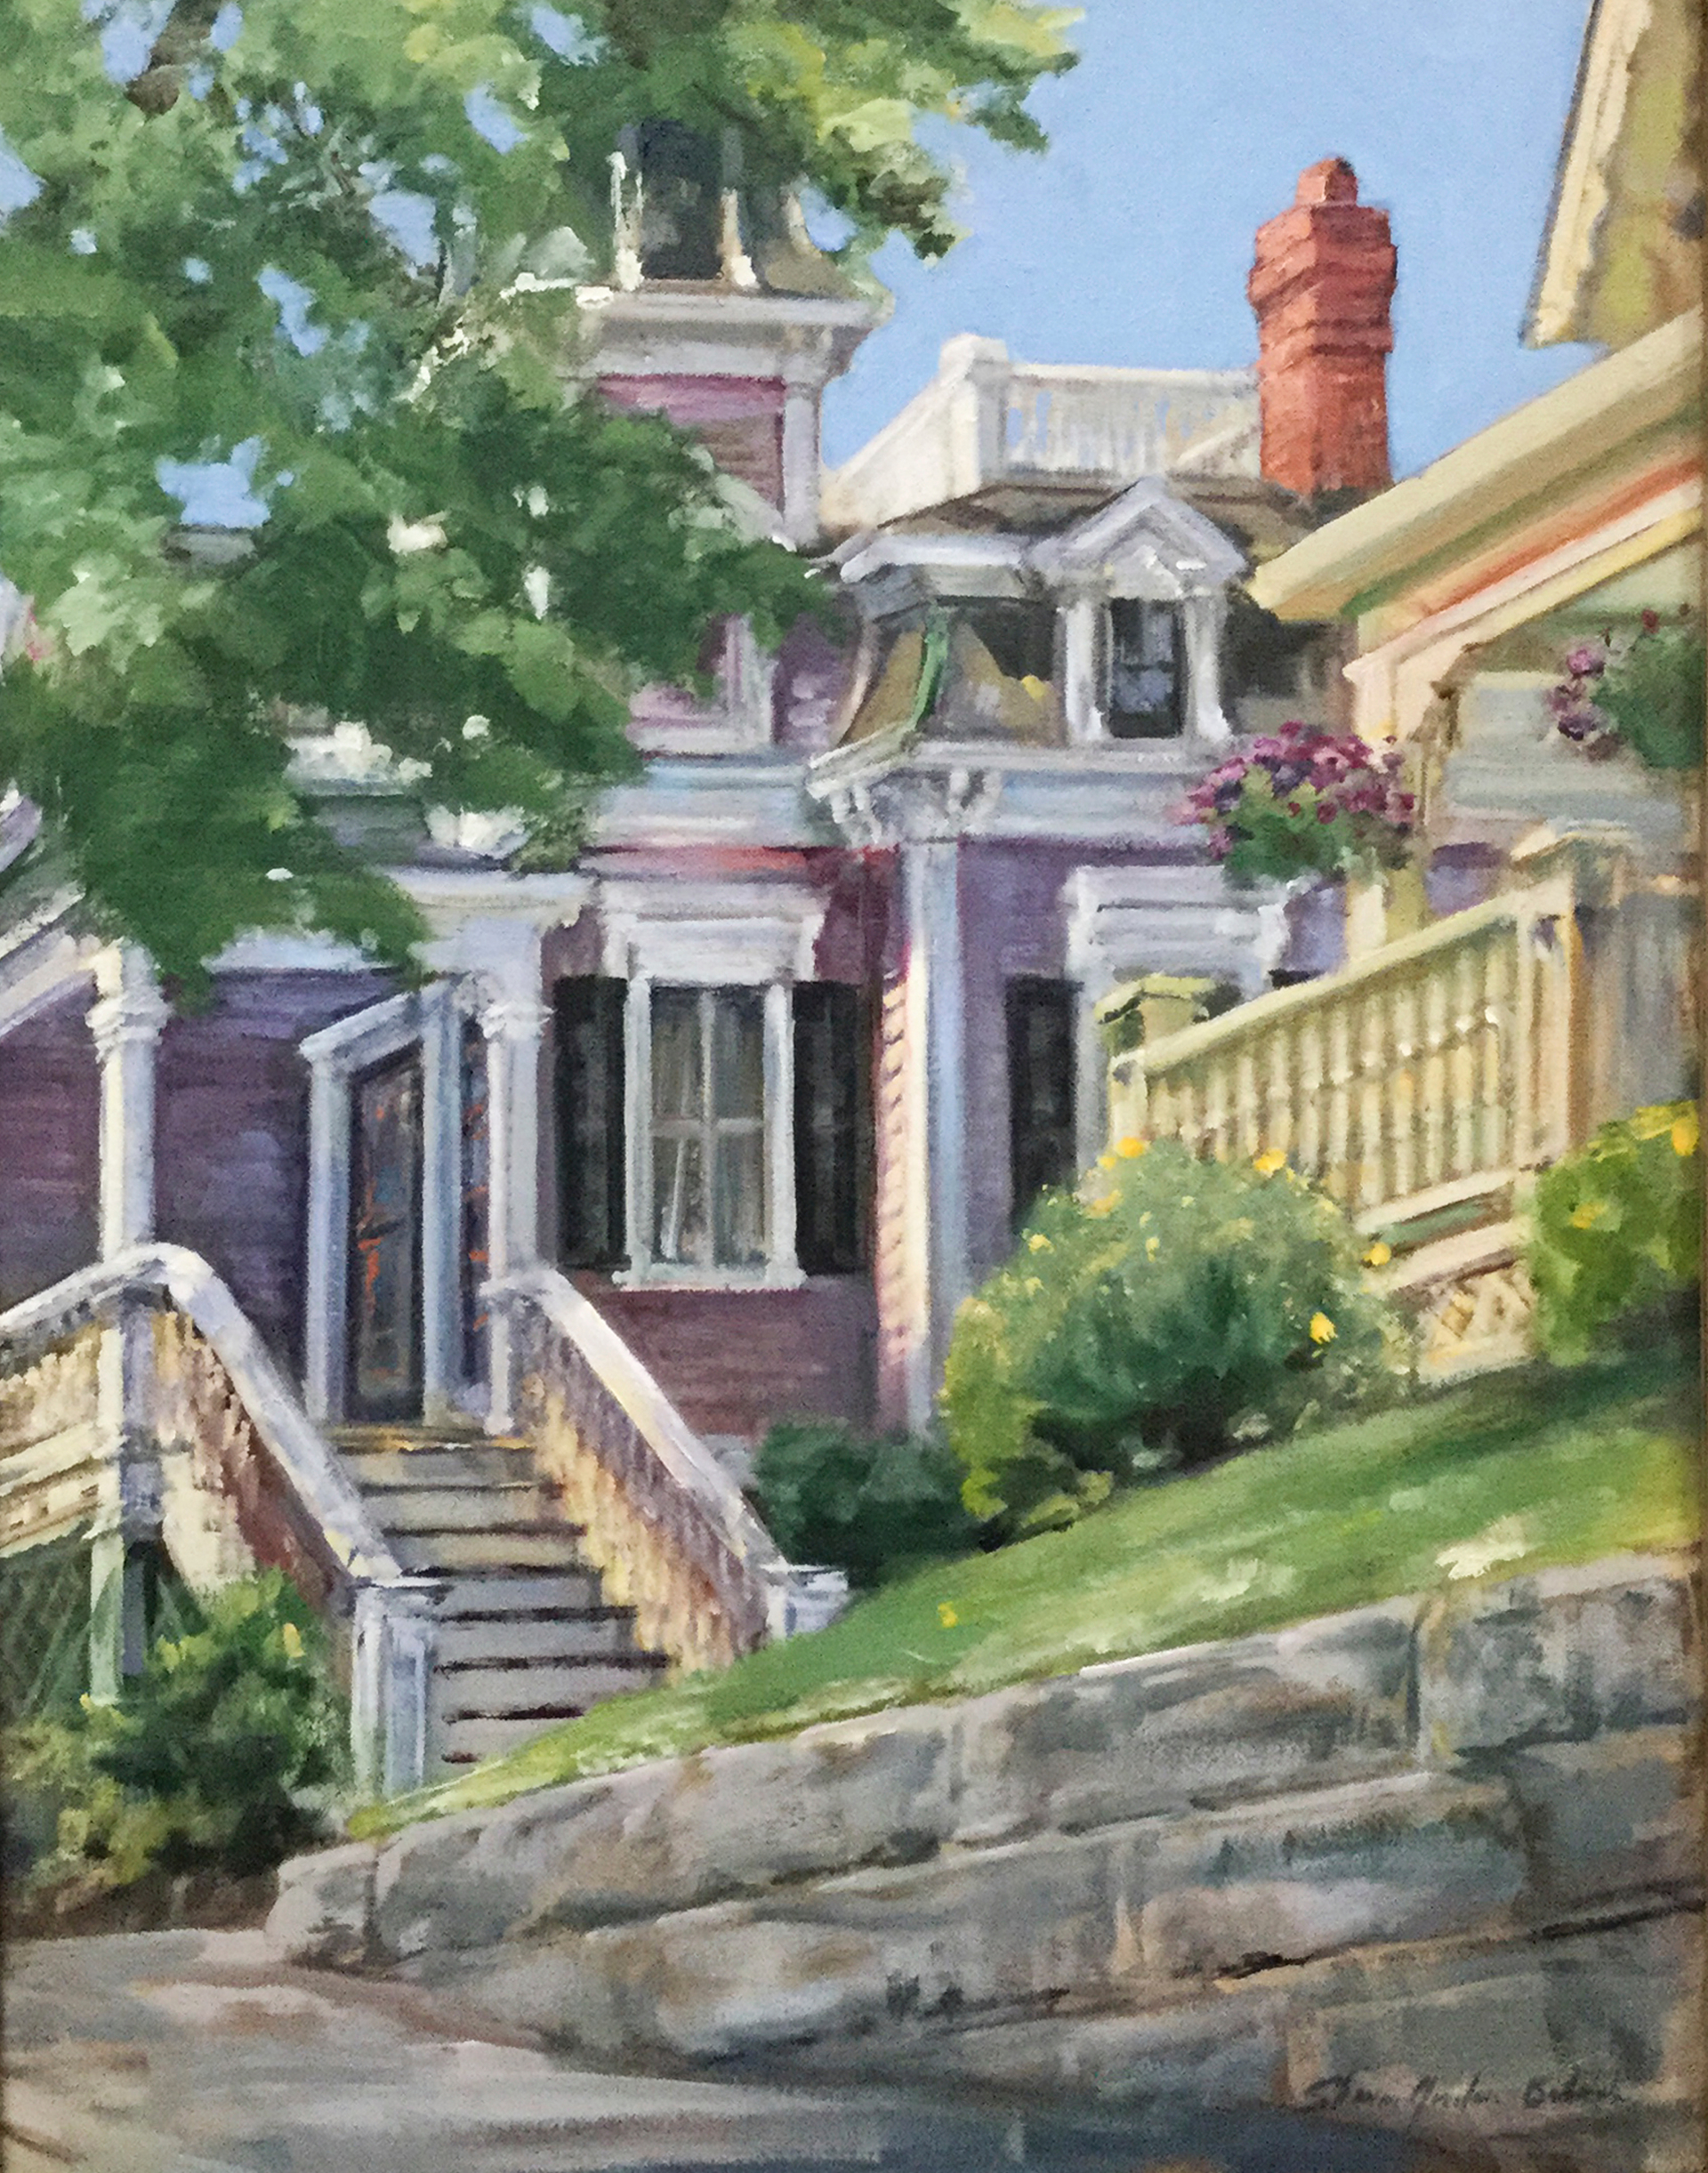 Hopper's Painted Gloucester House by Sharon Bahosh